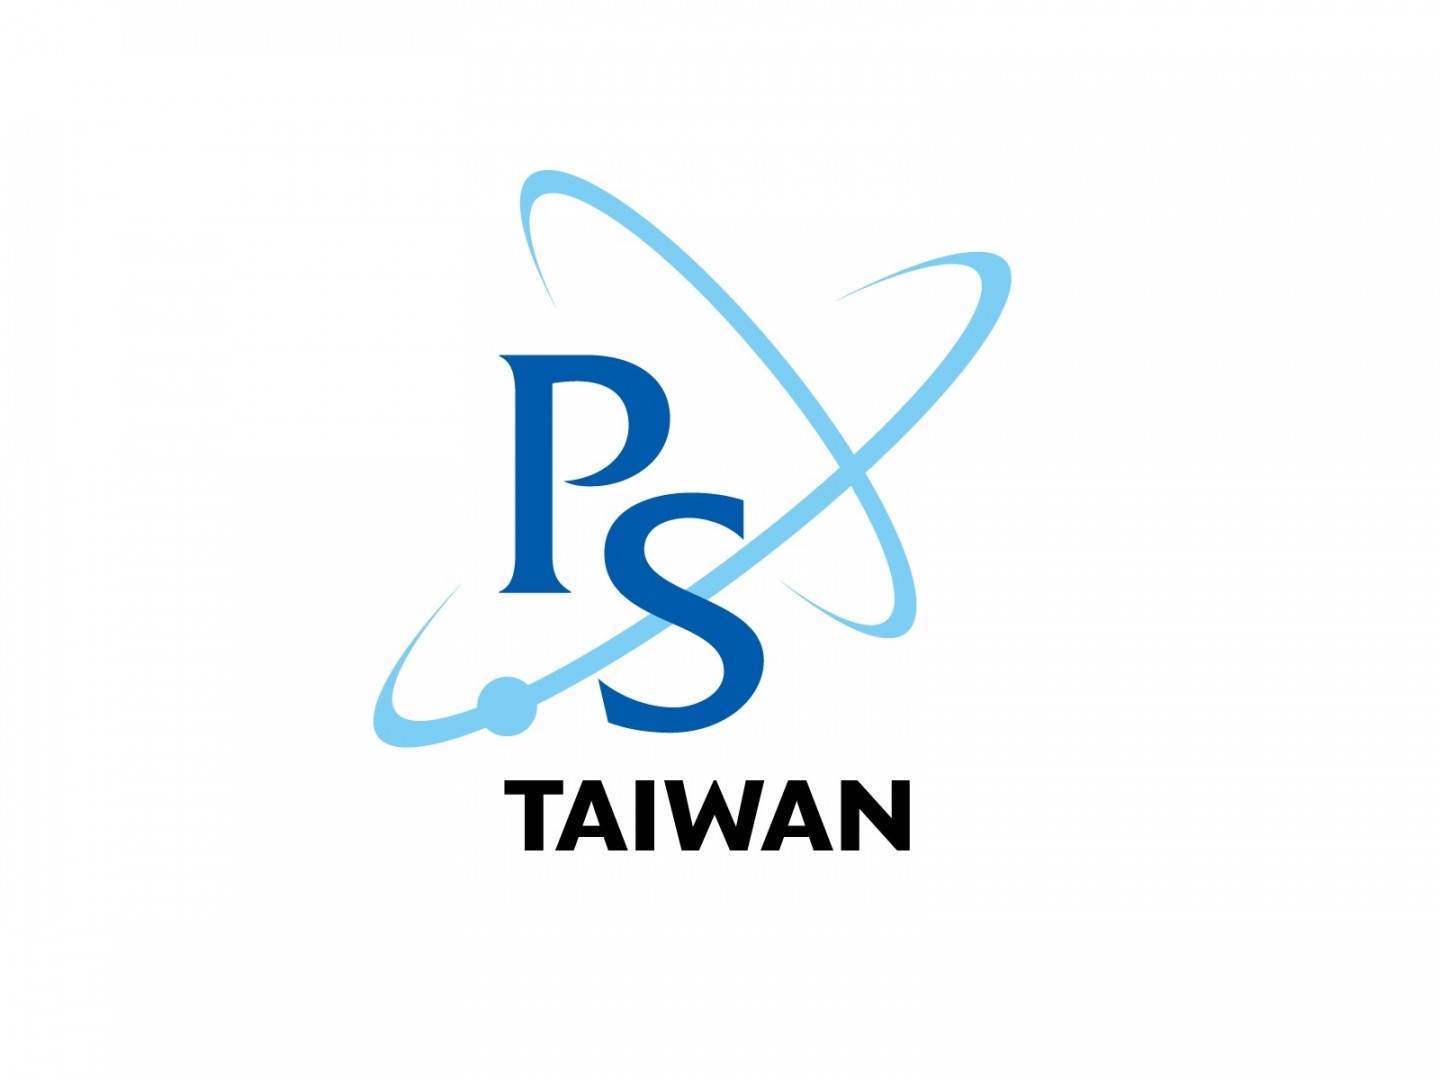  Statement by the Physical Society of Taiwan 